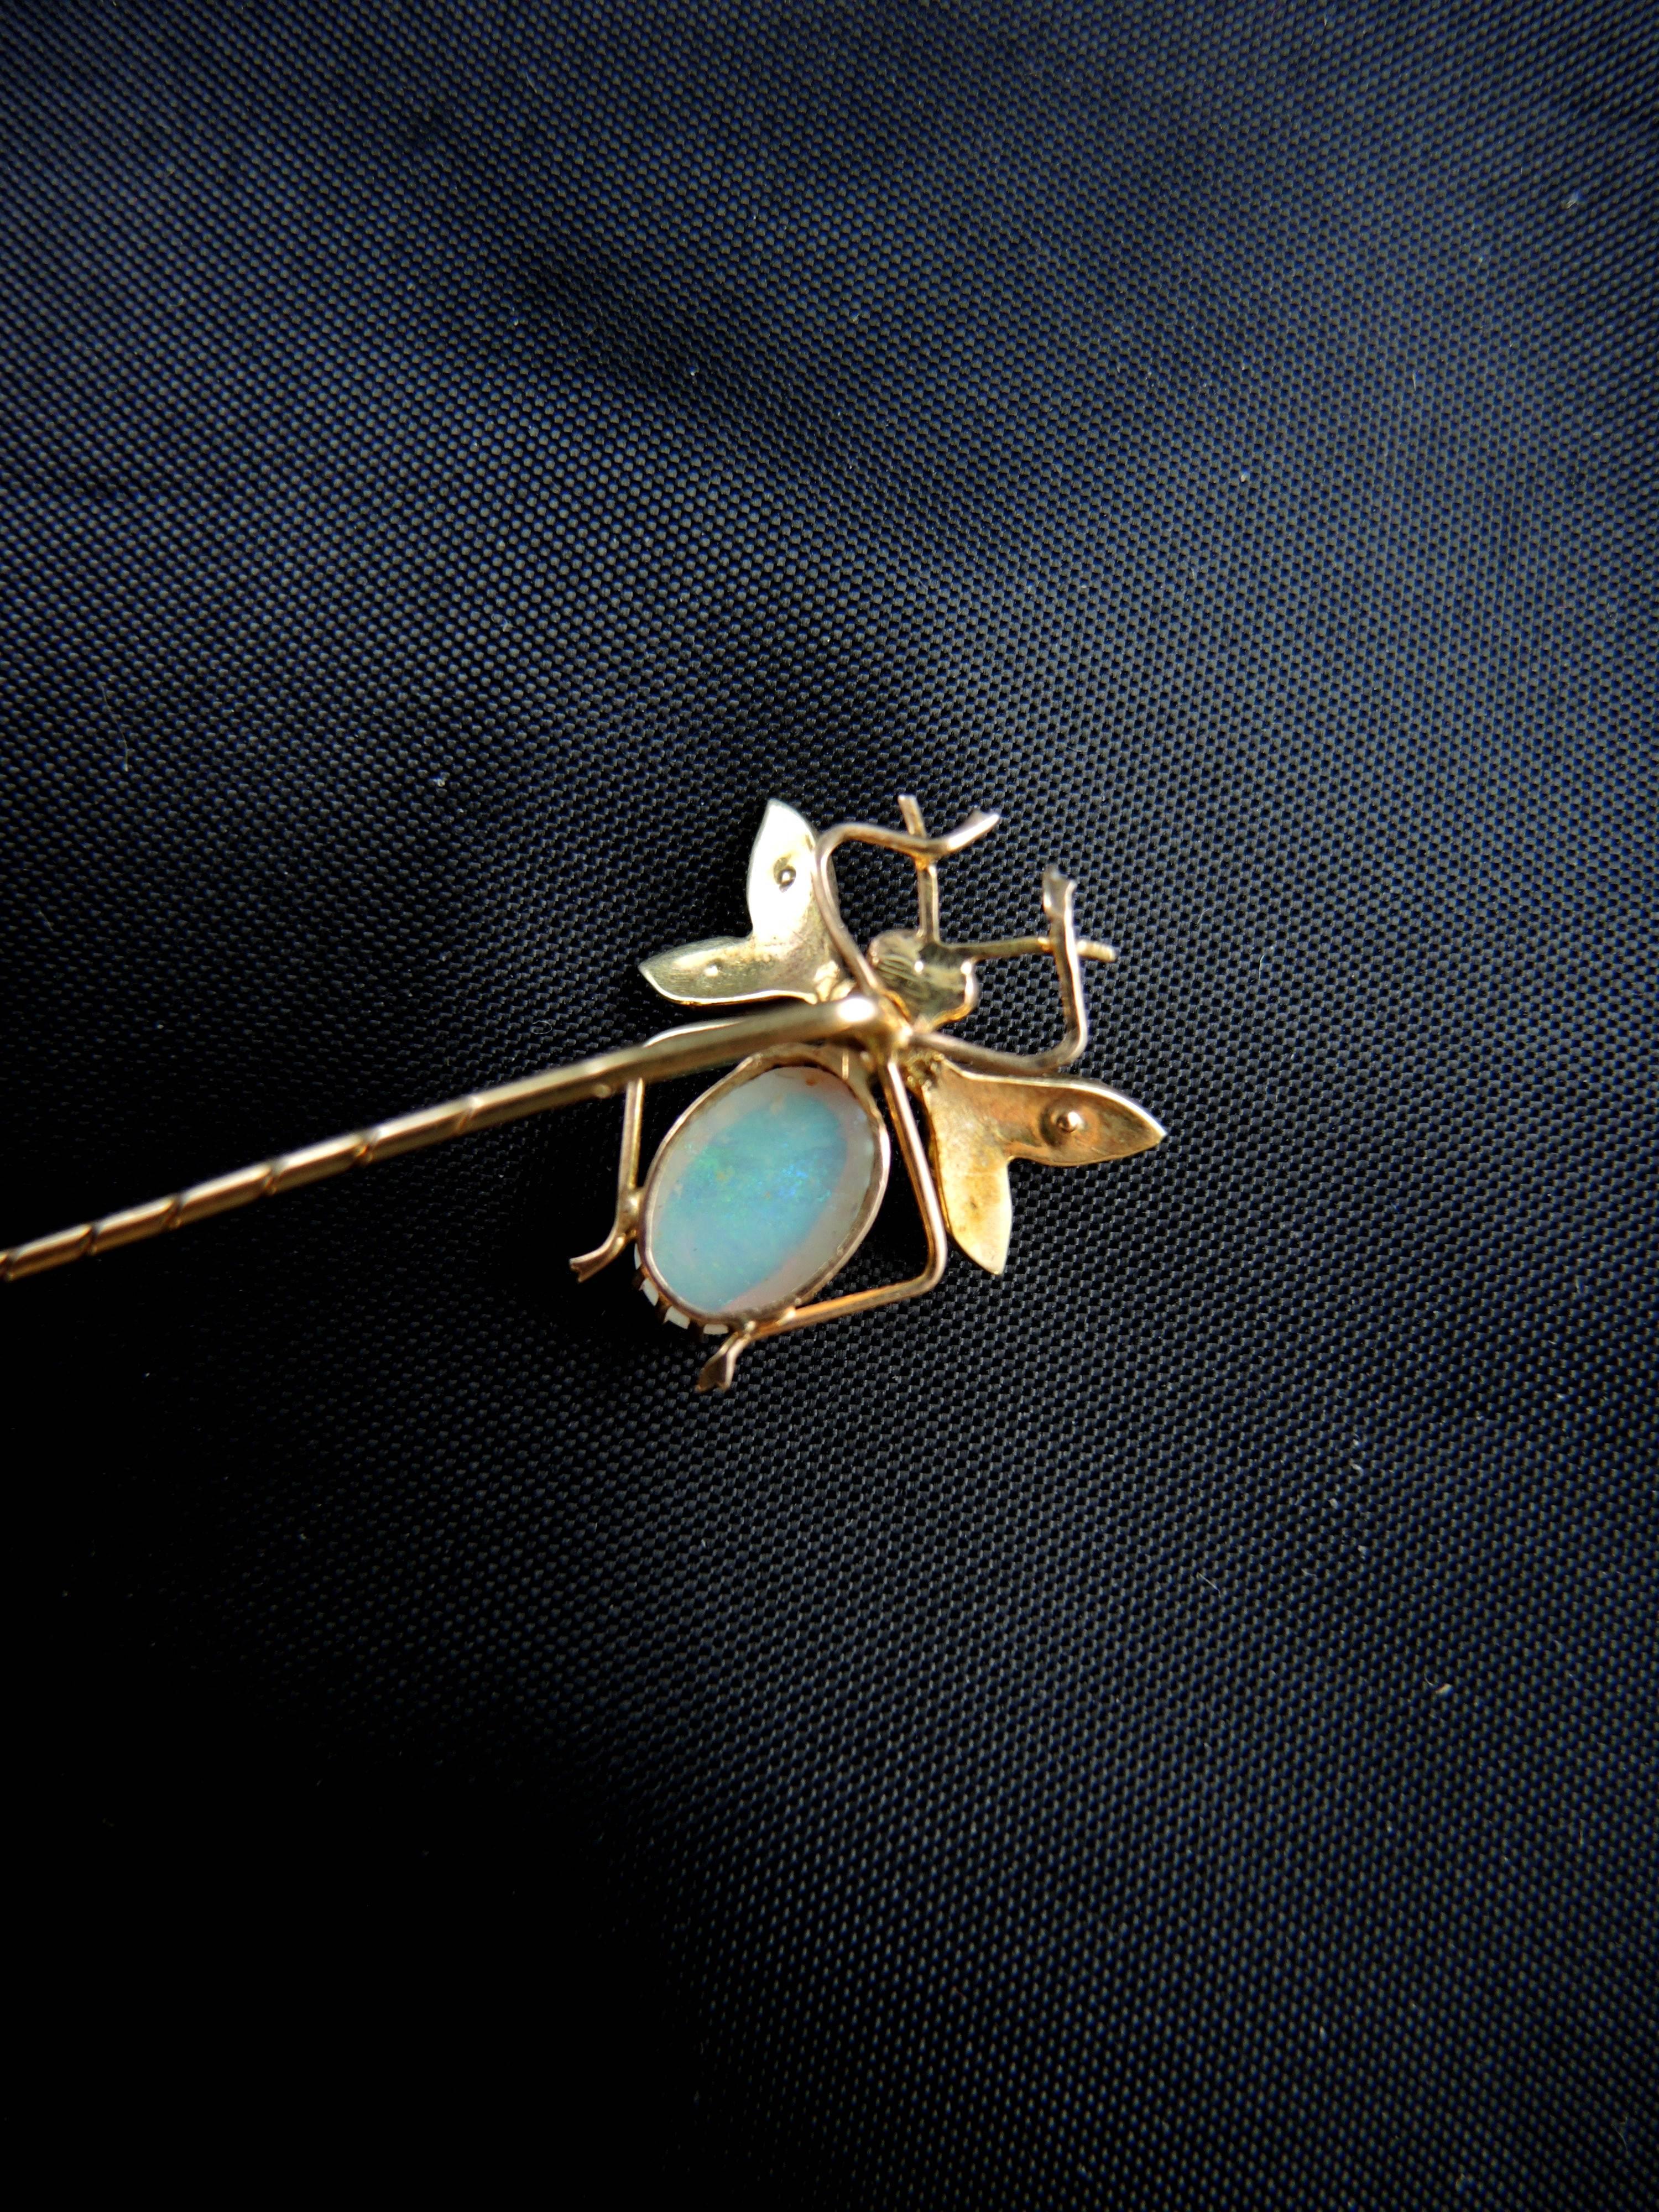 Late Victorian Antique Insect Pin Set with an Opal